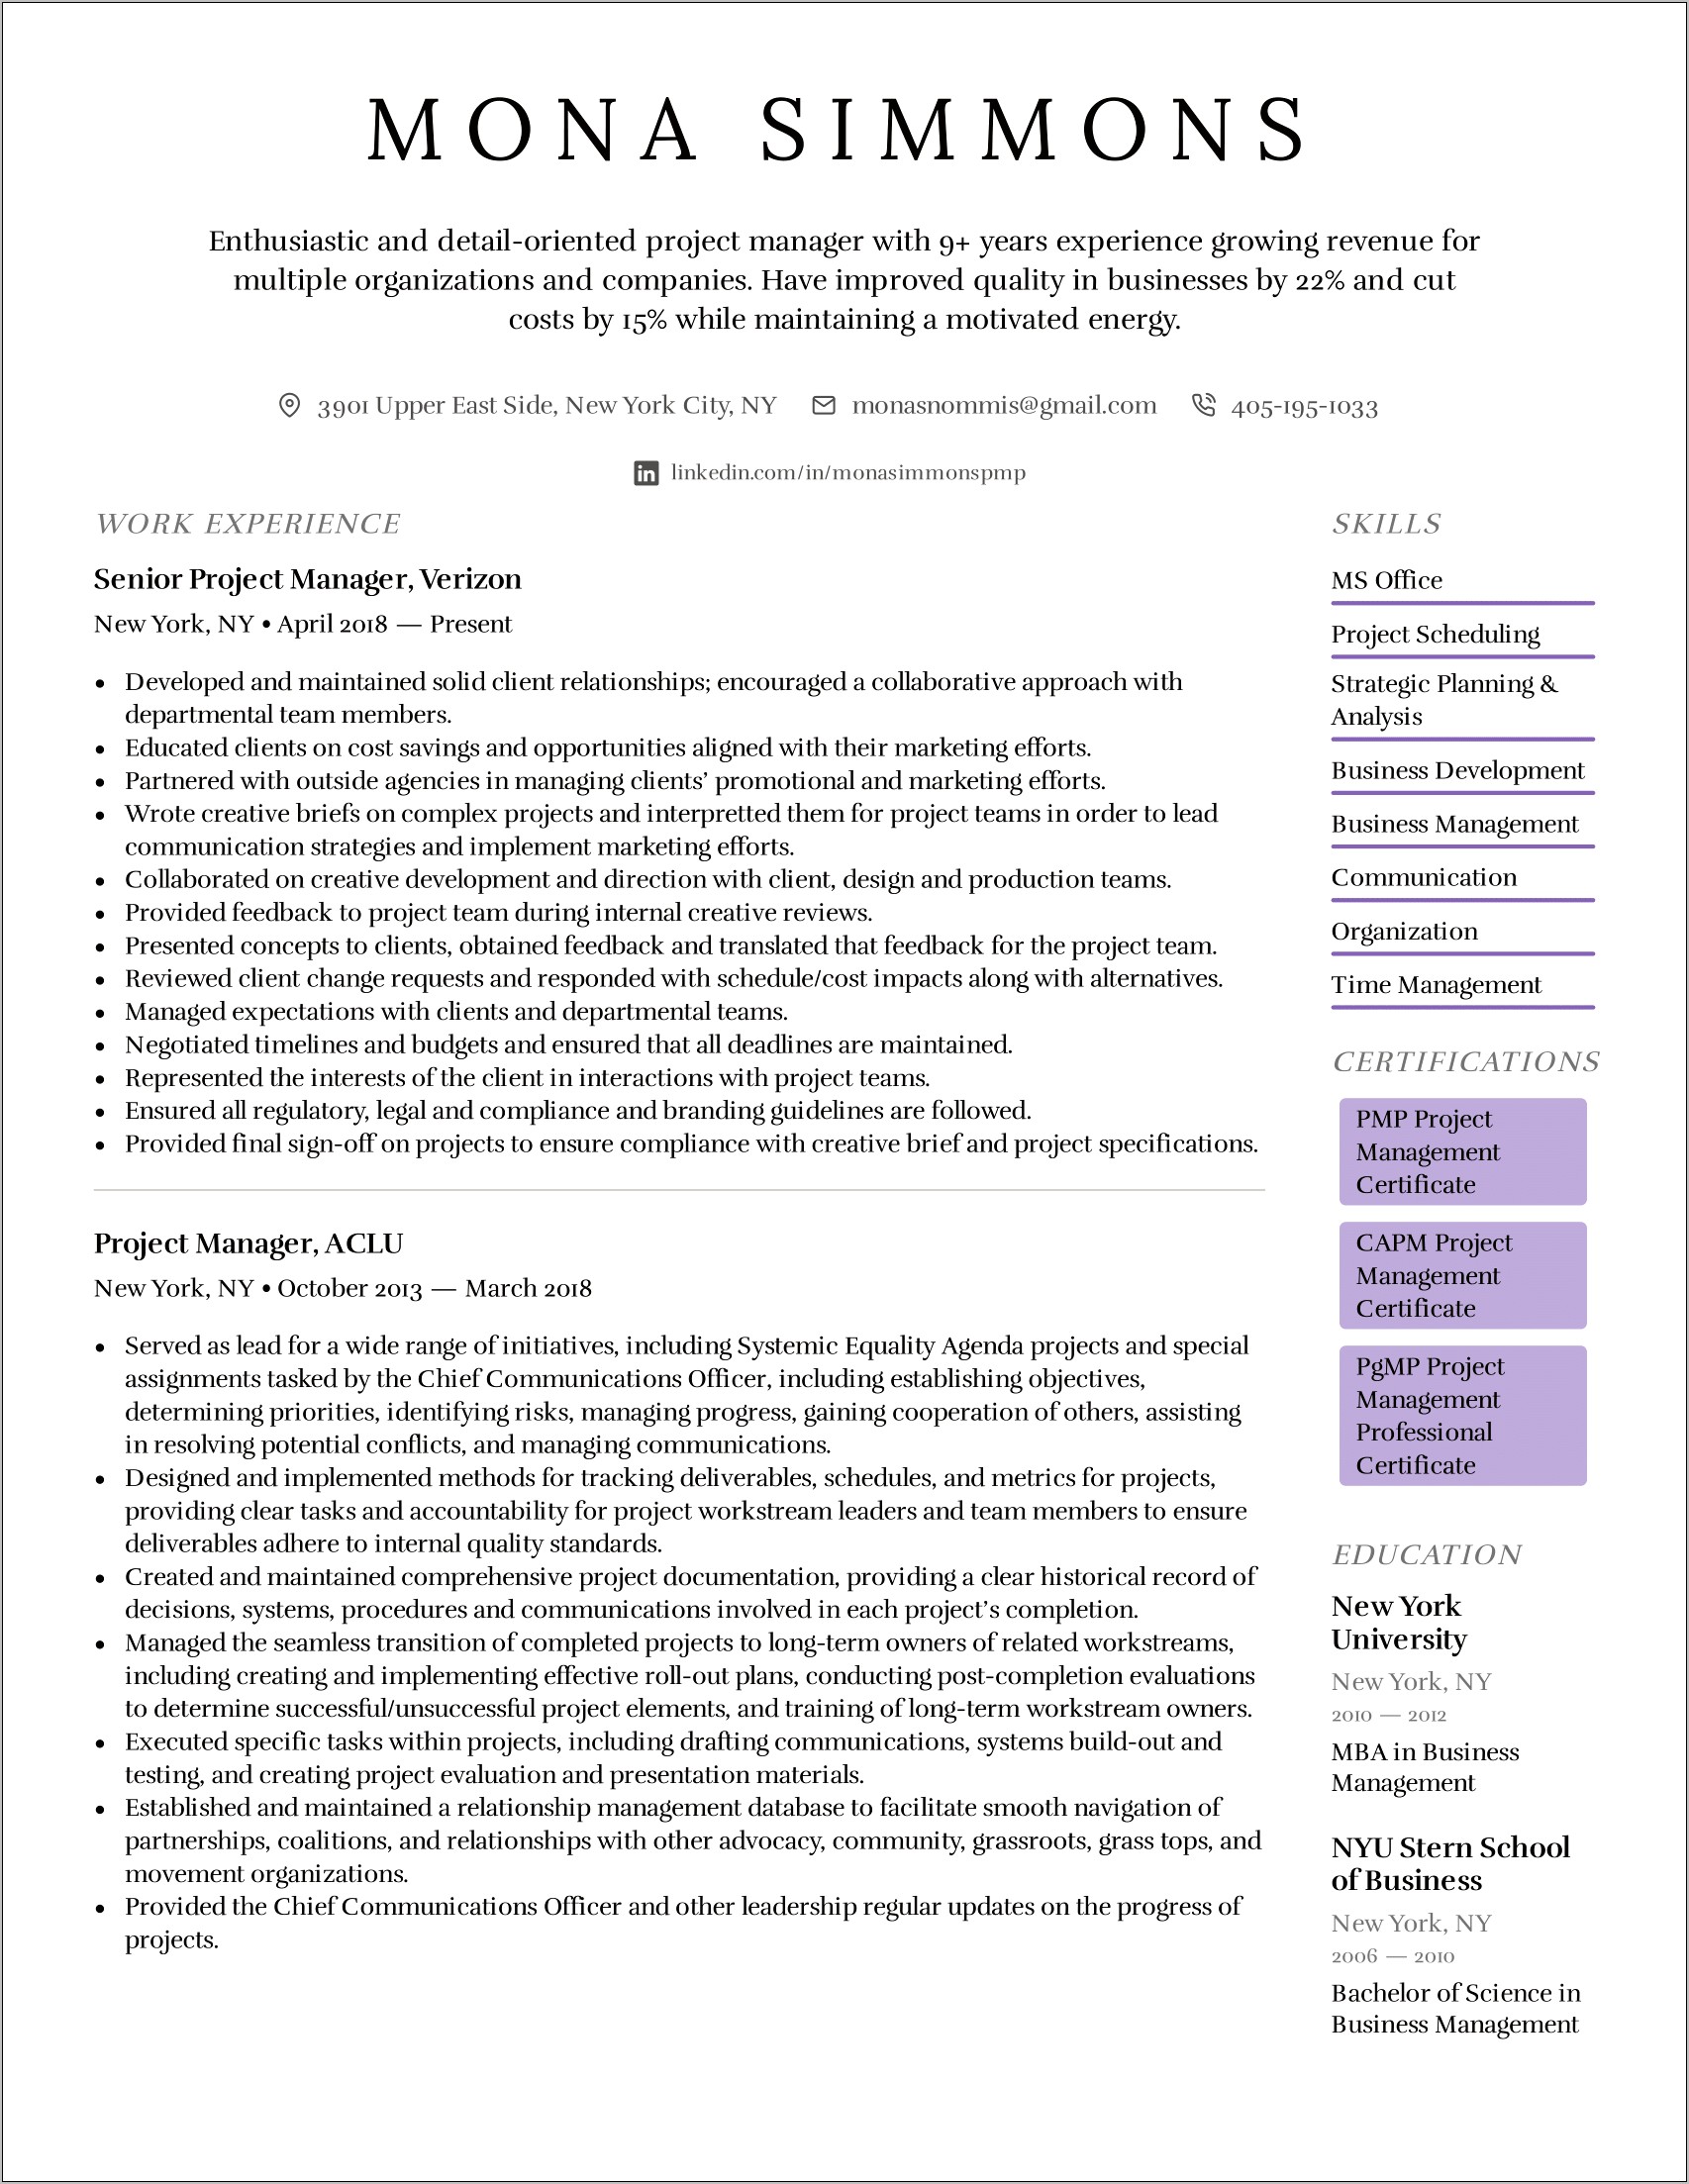 Marketing Project Manager Resume Objective